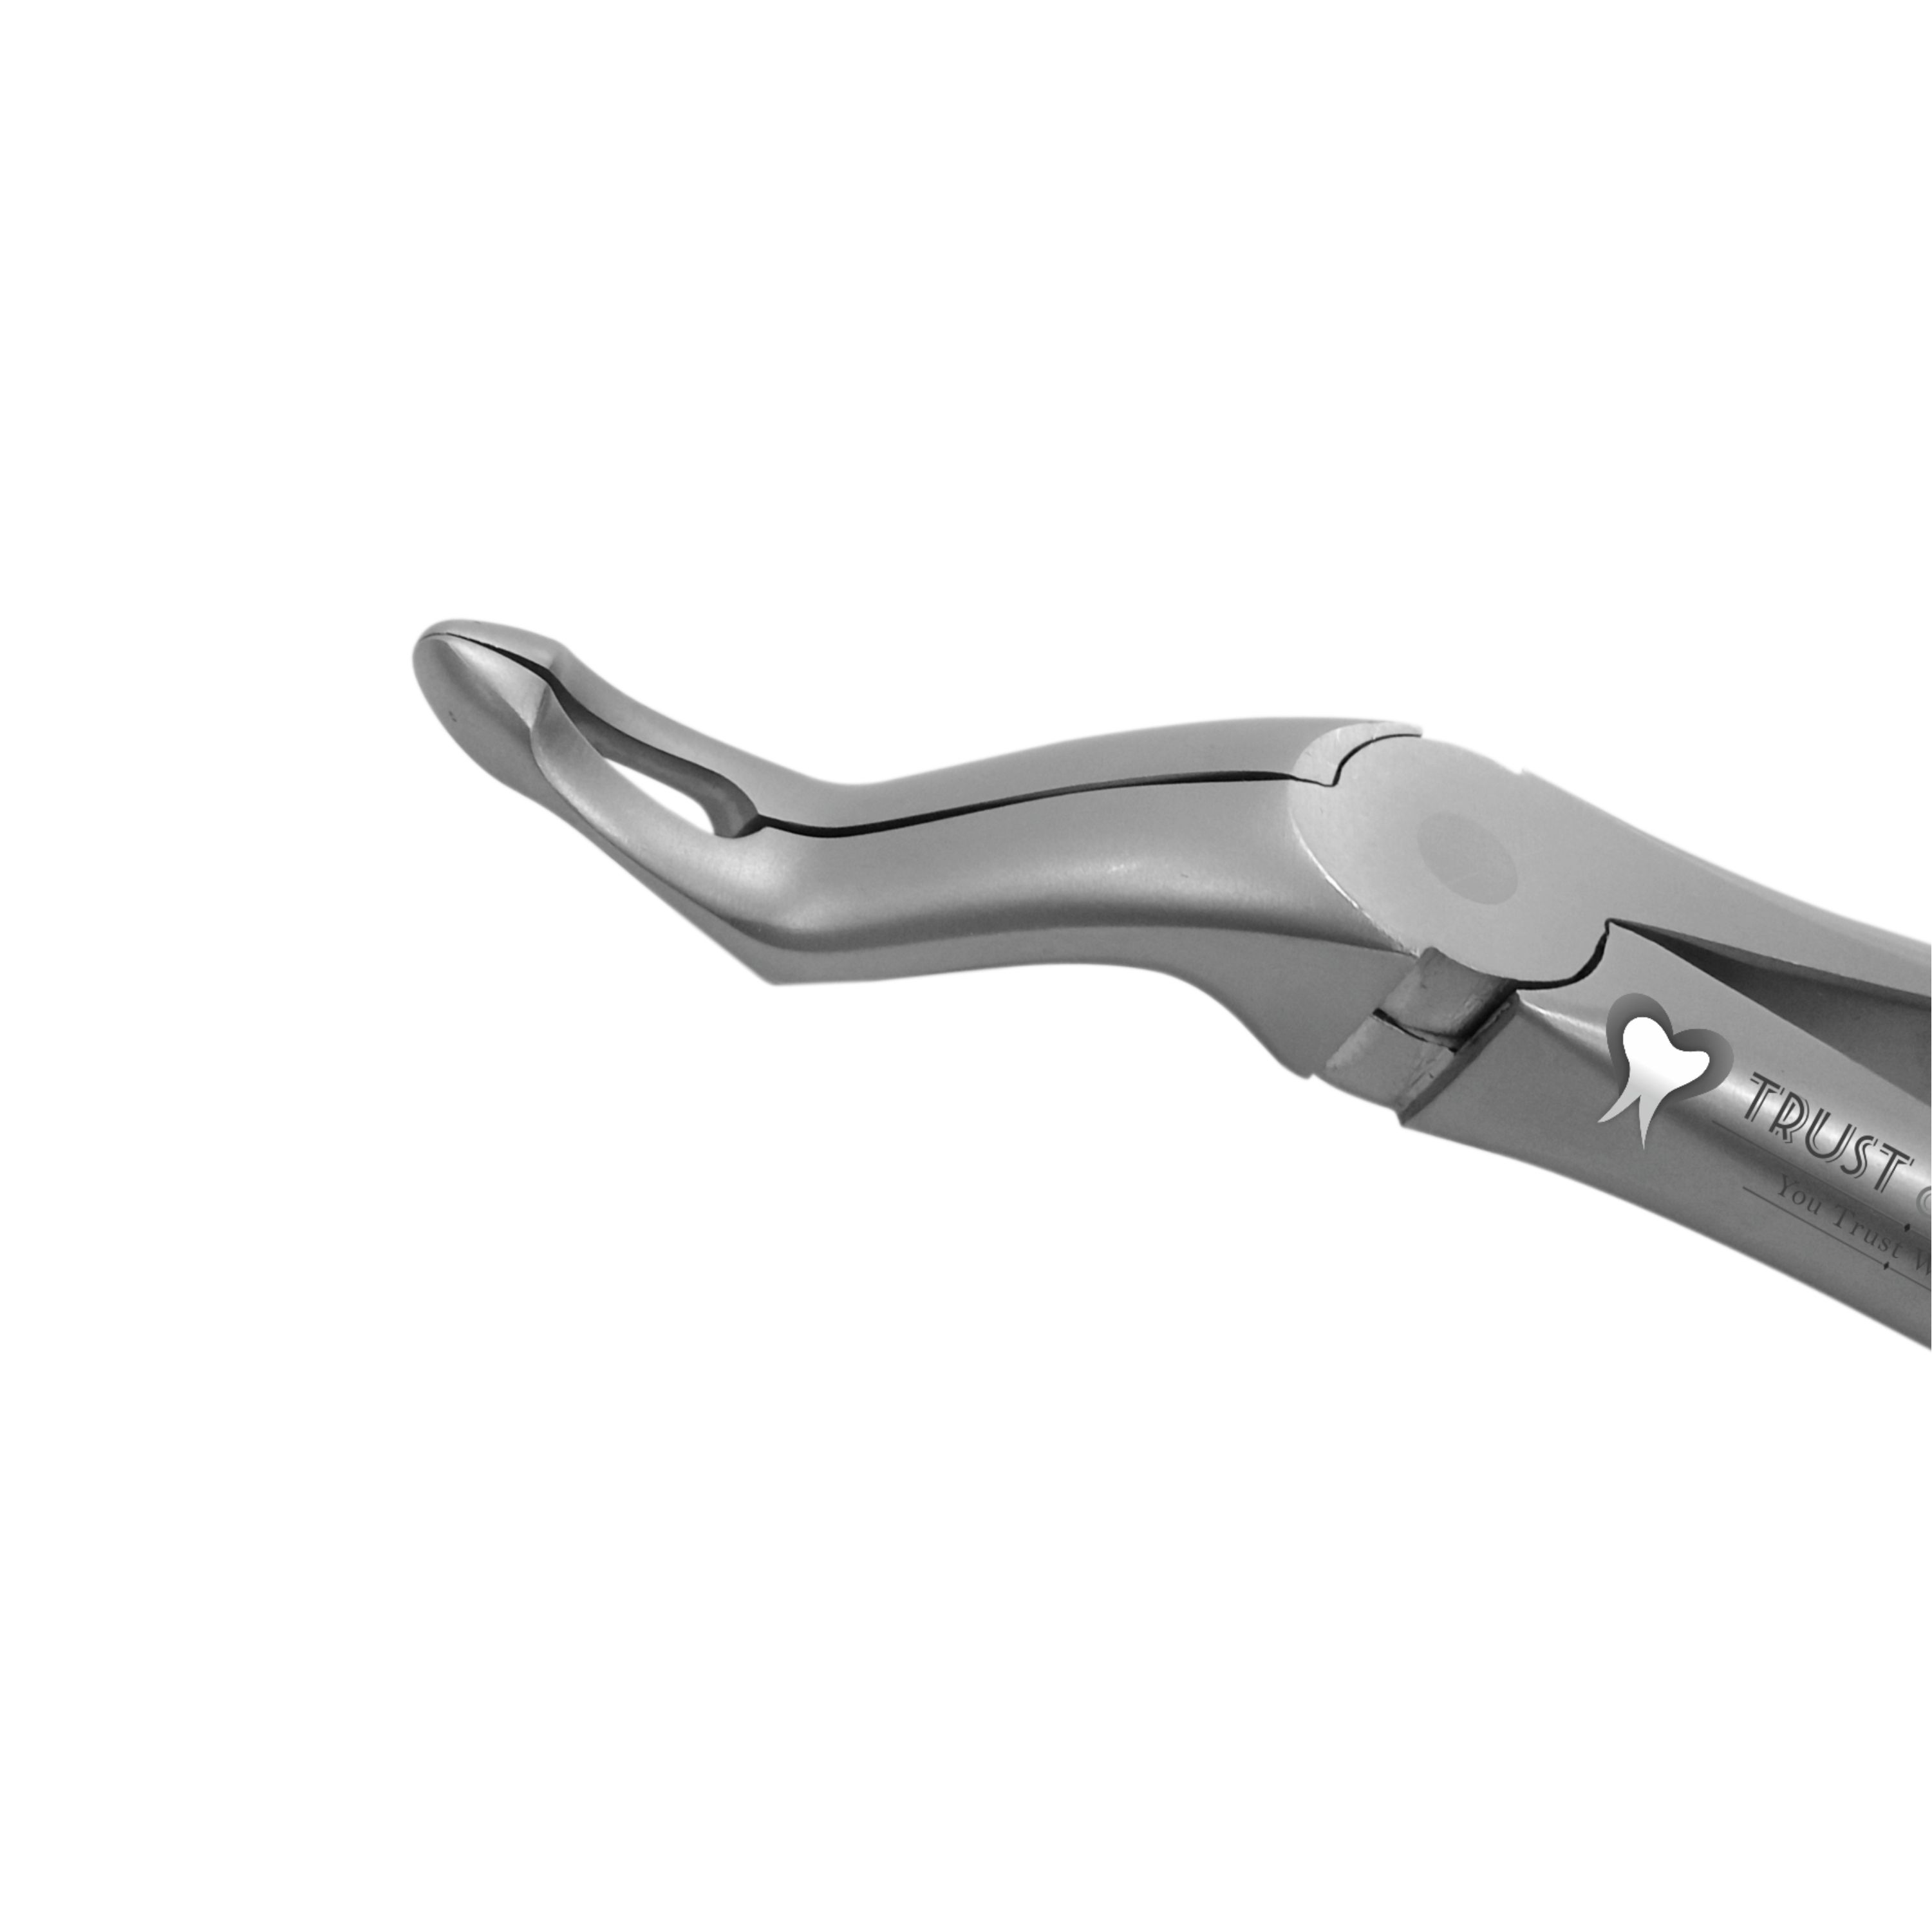 Trust & Care Secure Forcep Upper Roots Fig No. 951.00